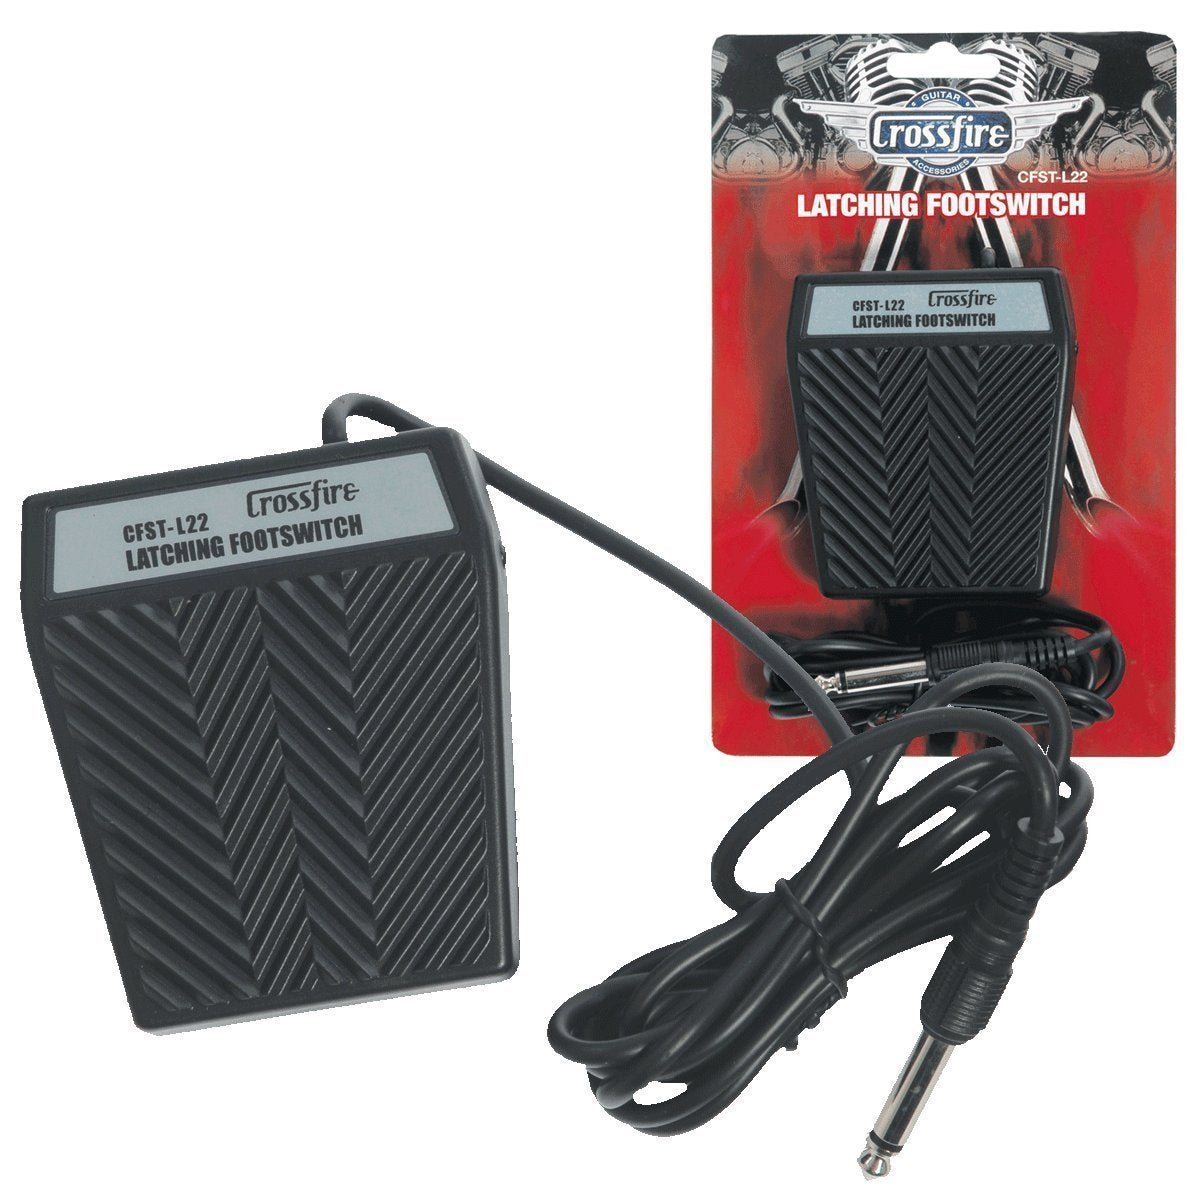 Crossfire Latching On/Off Footswitch-CFST-L22